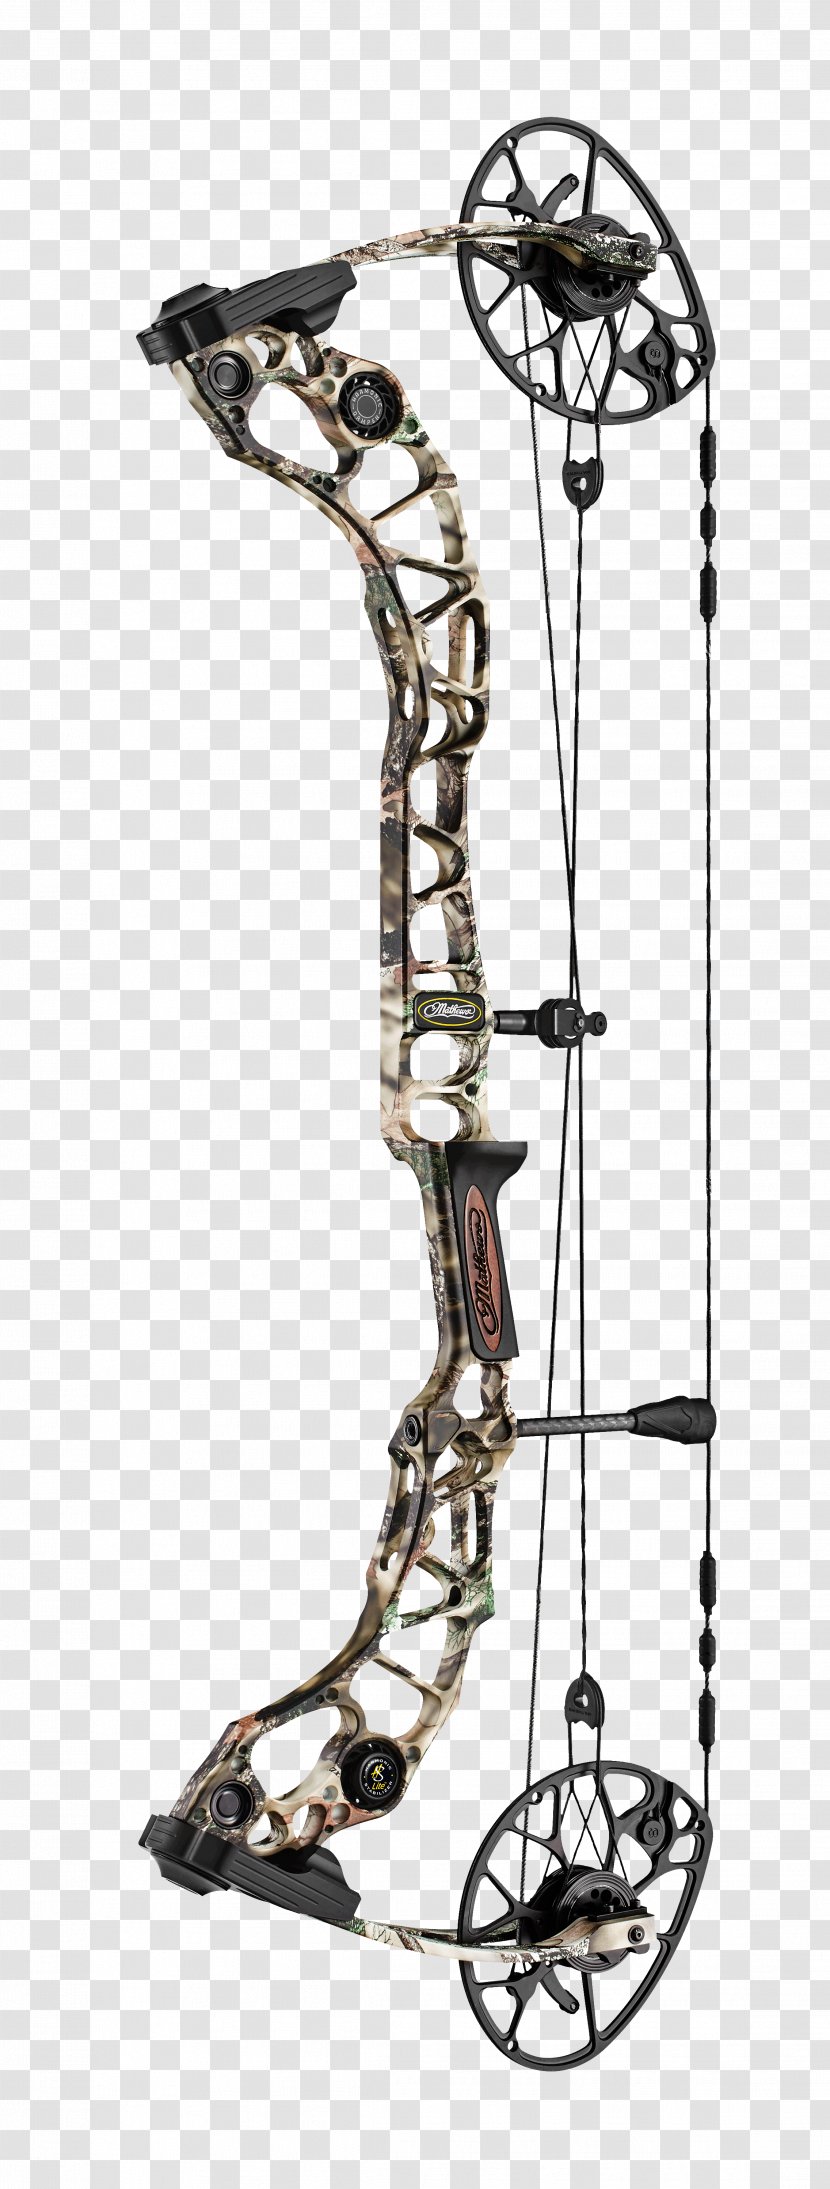 Compound Bows Bow And Arrow Archery Hunting Cam - Advanced Transparent PNG